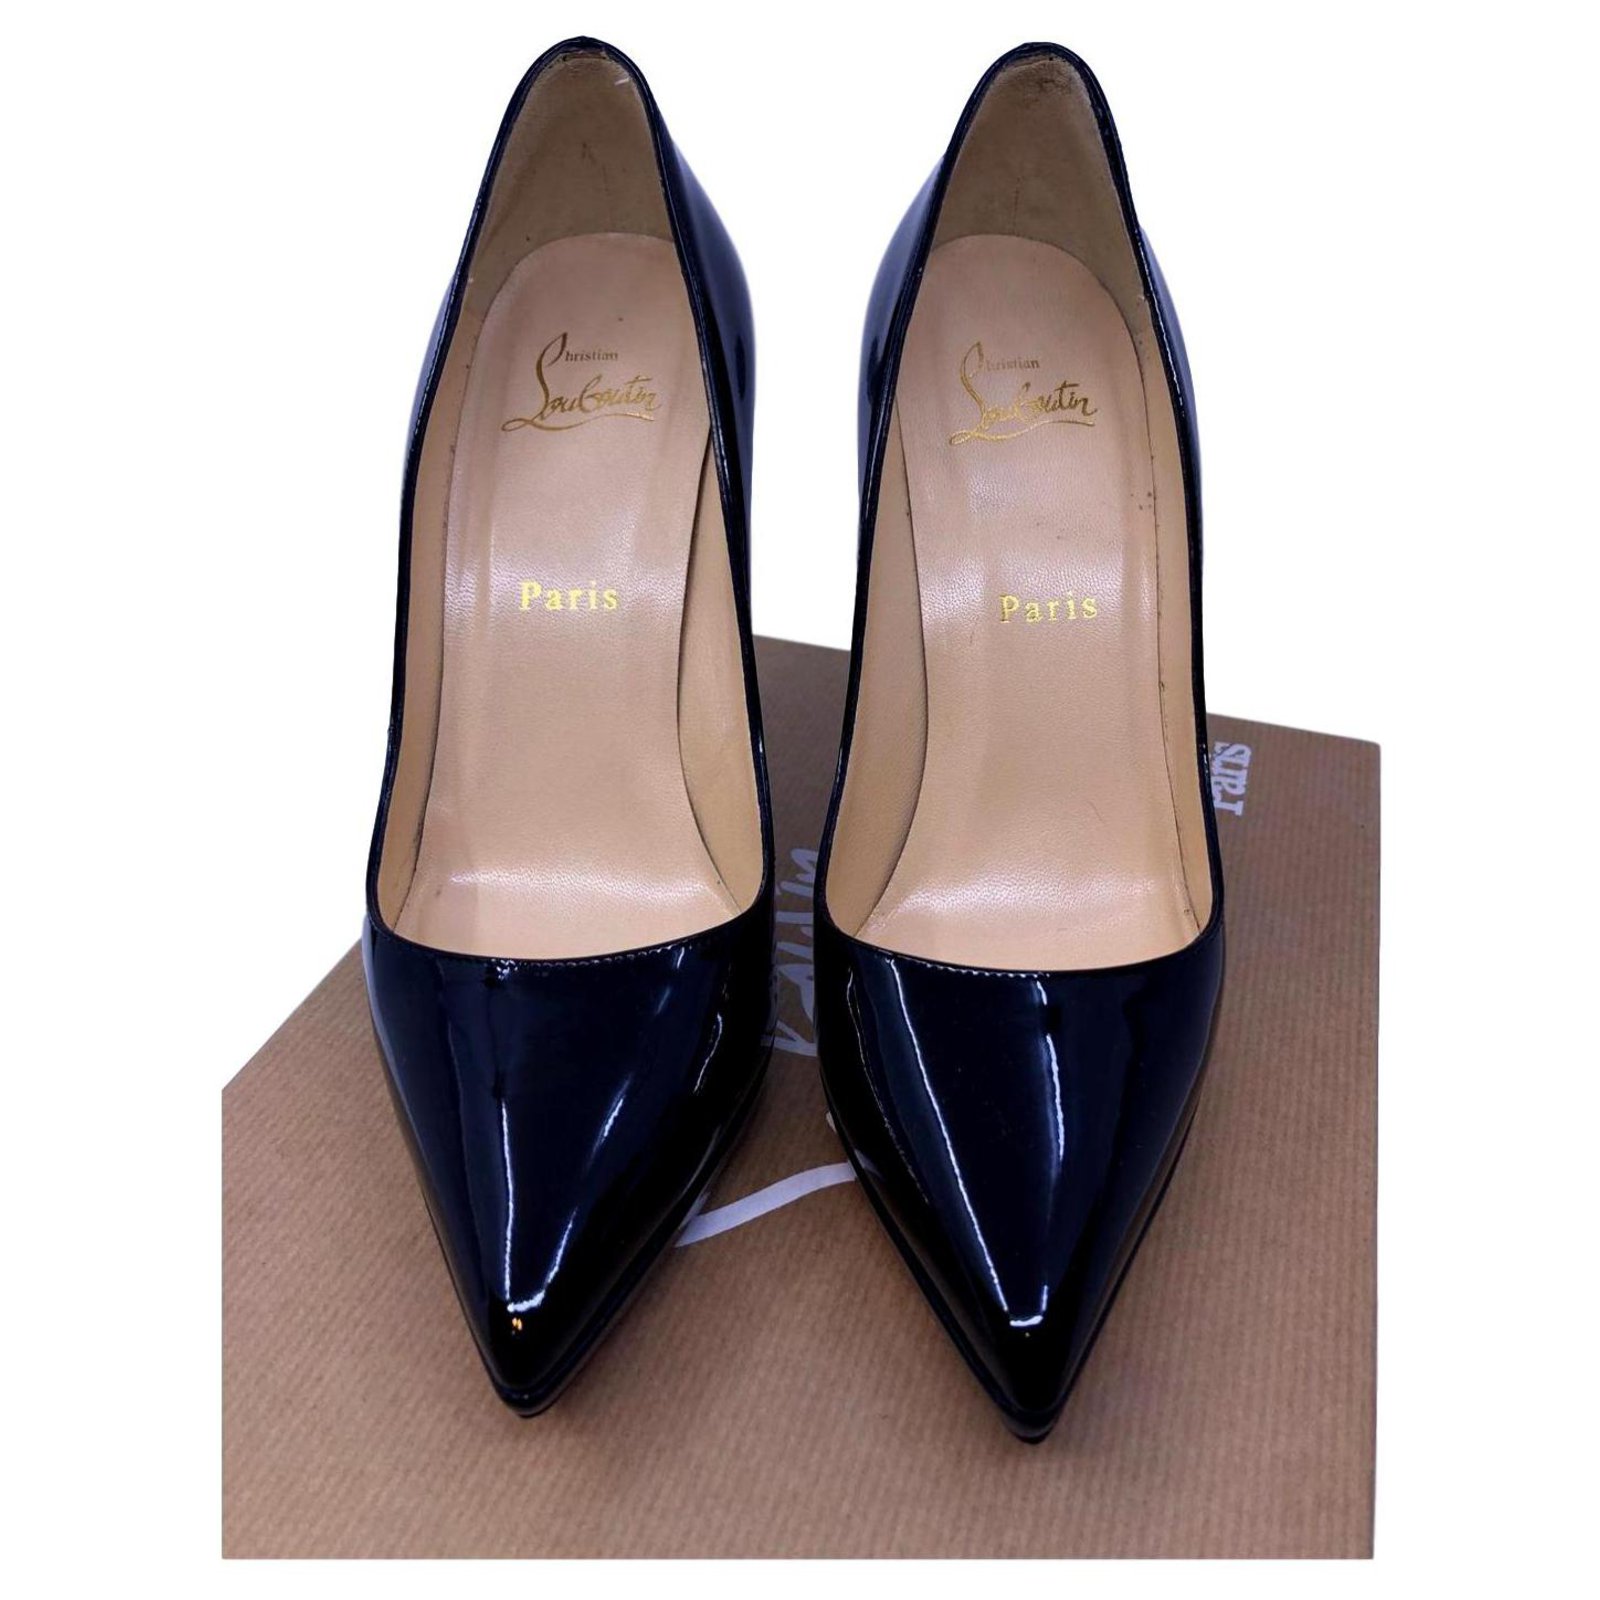 Christian Louboutin Black Patent Leather Pigalle Pointed Toe Pumps